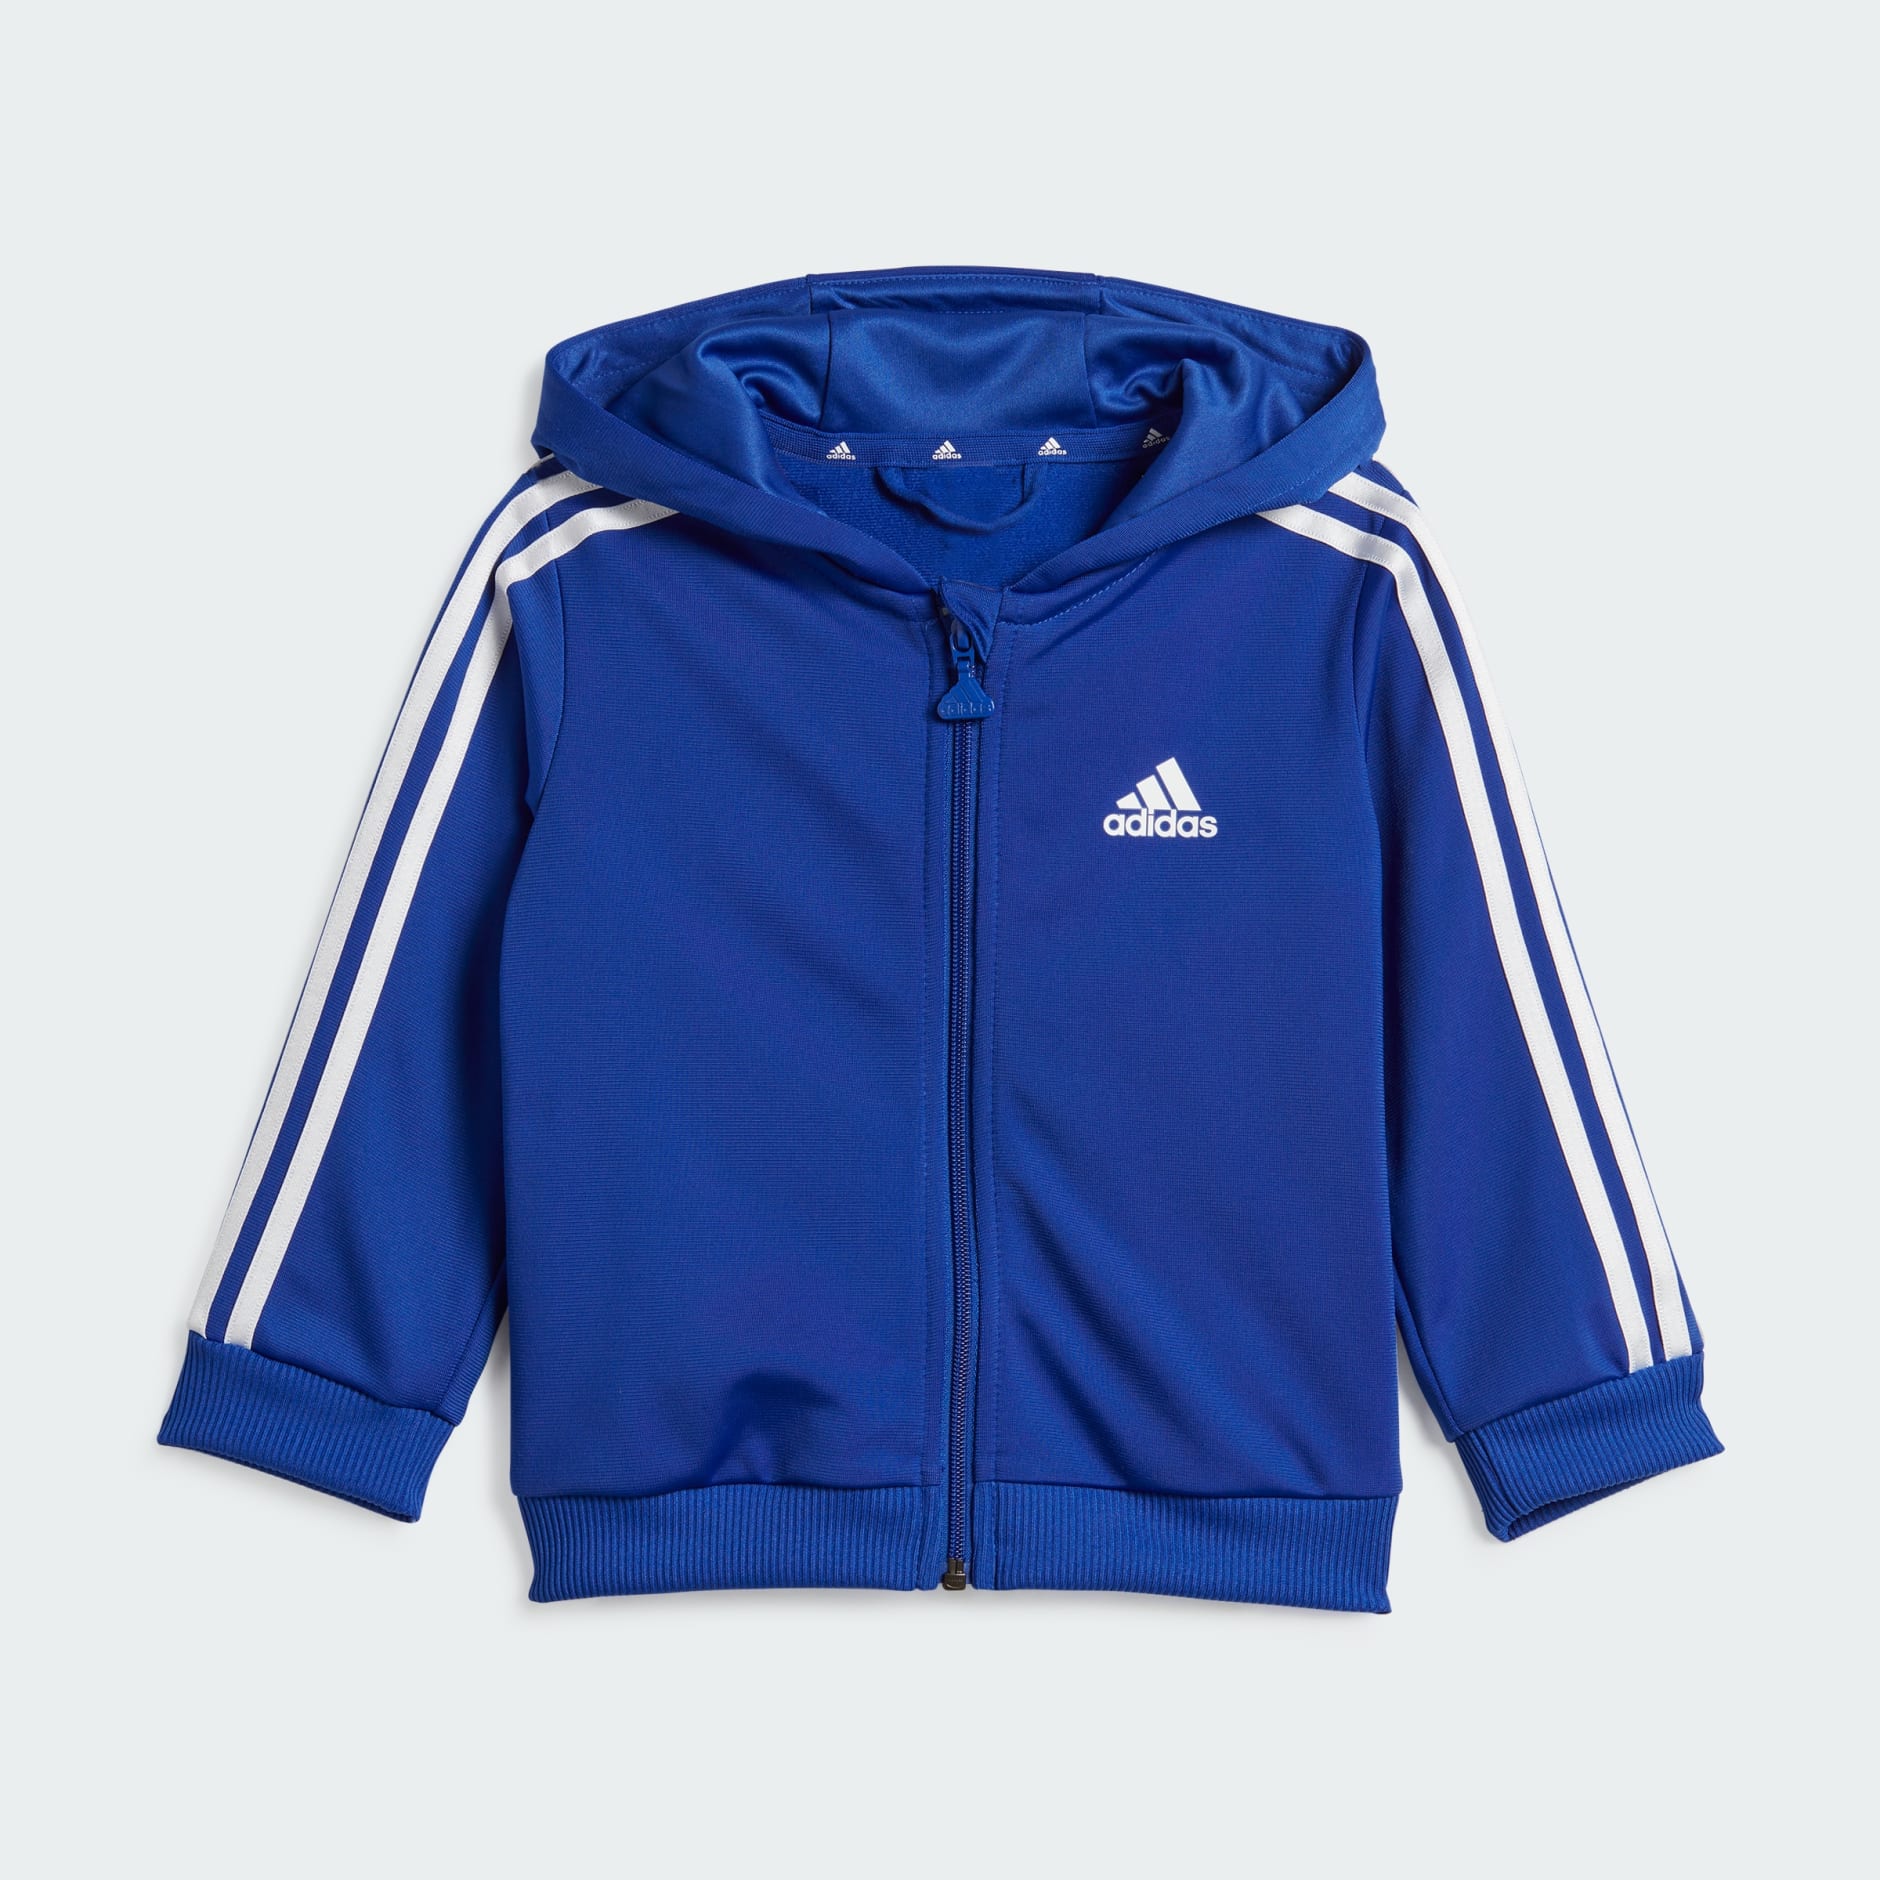 Kids Clothing - Essentials Shiny Hooded Track Suit - Blue | adidas 